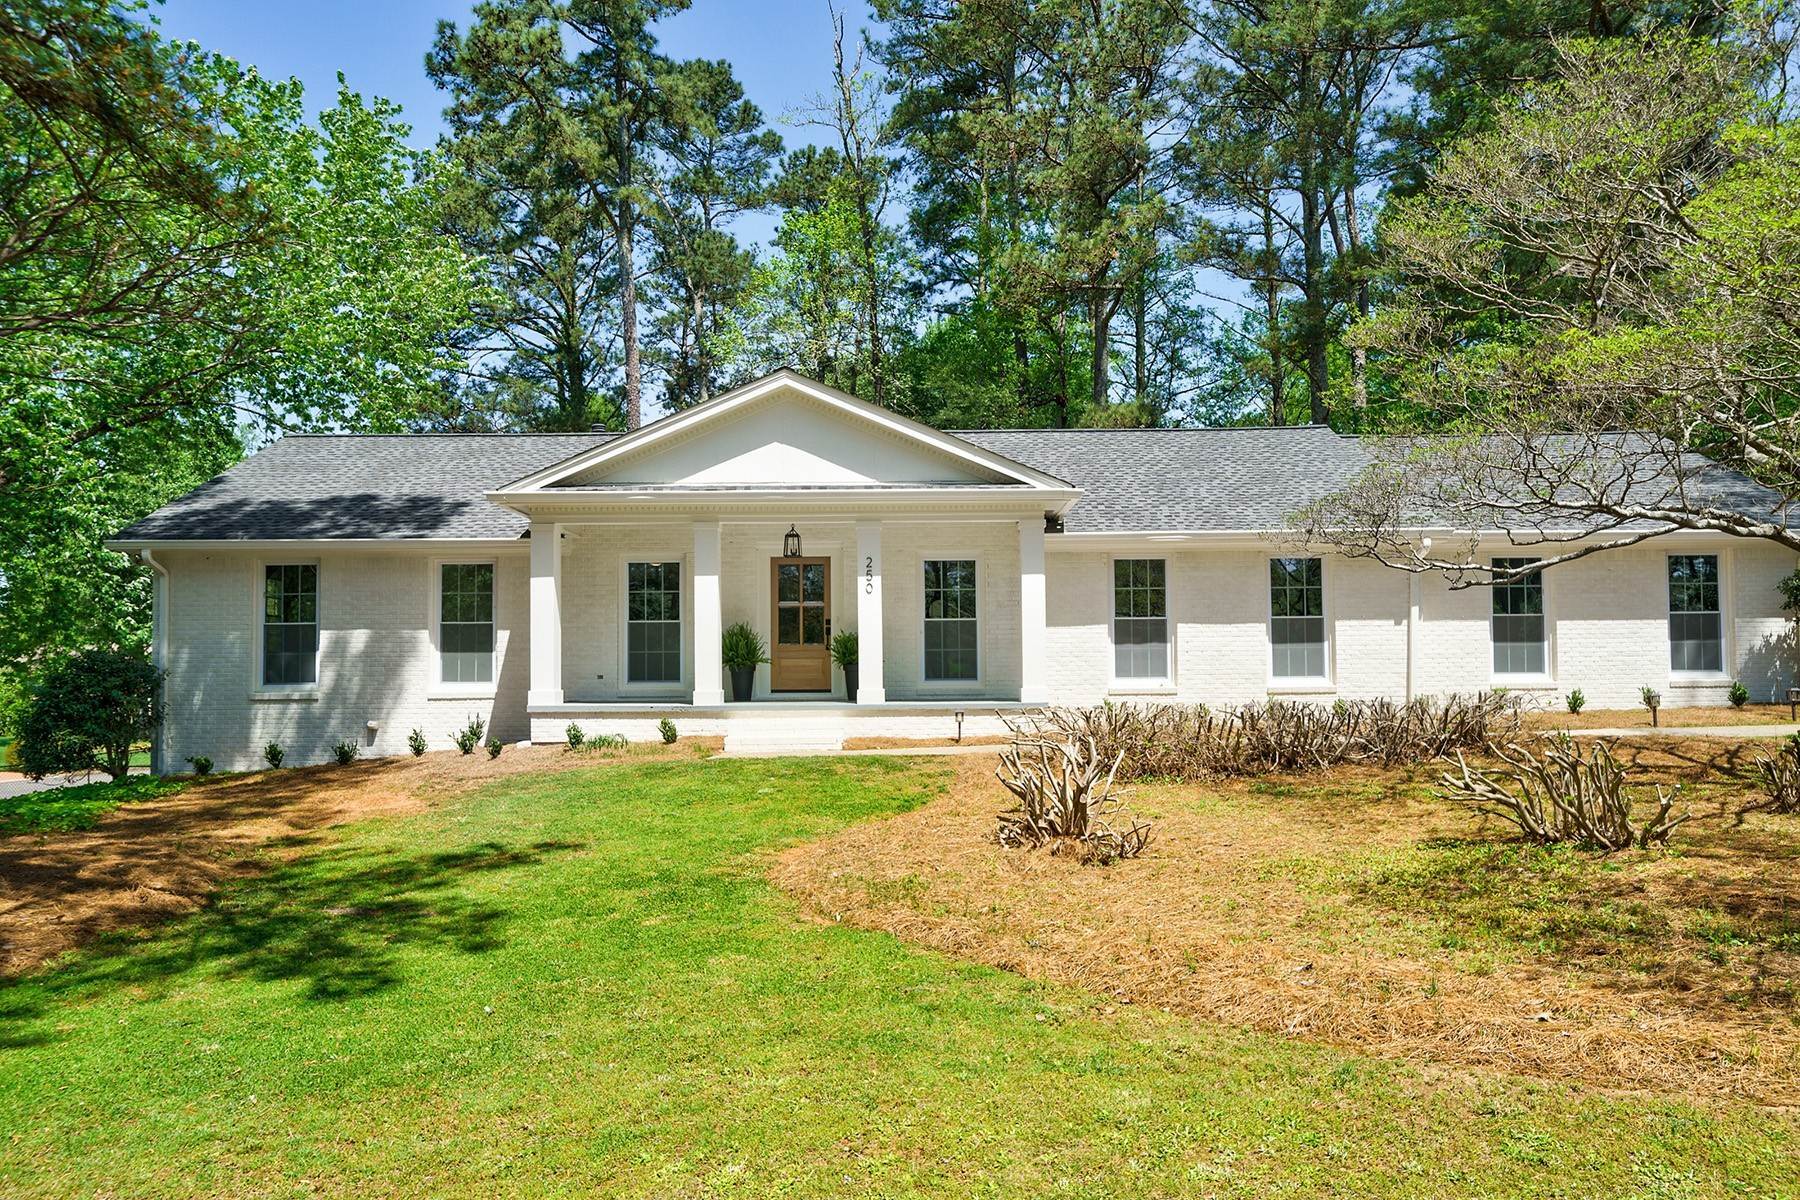 Single Family Homes για την Πώληση στο Total Ranch Renovation With An Open Interior That Will Wow Any Buyer 250 Hembree Road Roswell, Γεωργια 30075 Ηνωμένες Πολιτείες